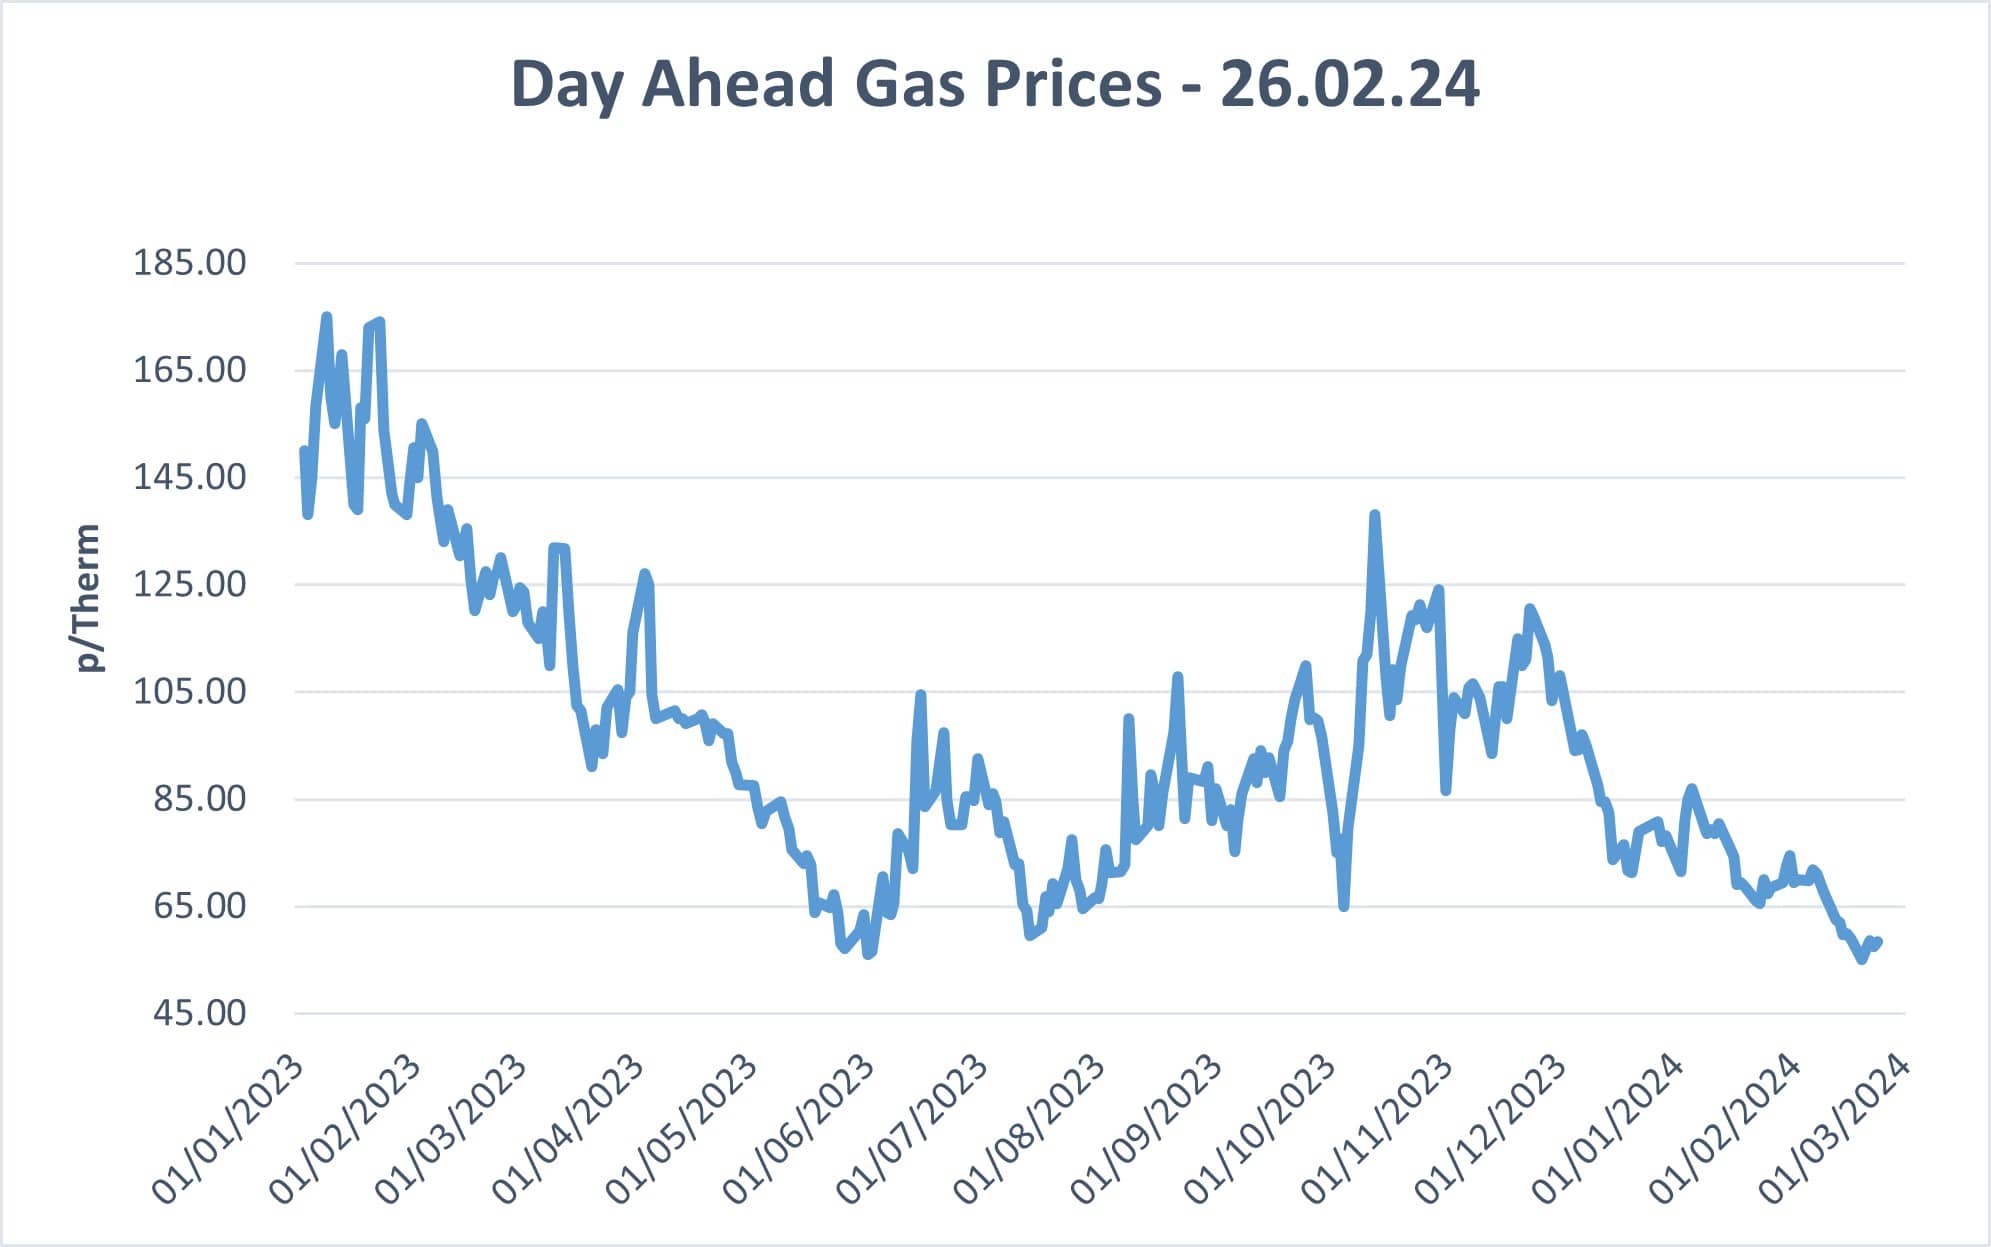 wholesale gas price day ahed 26.02.24